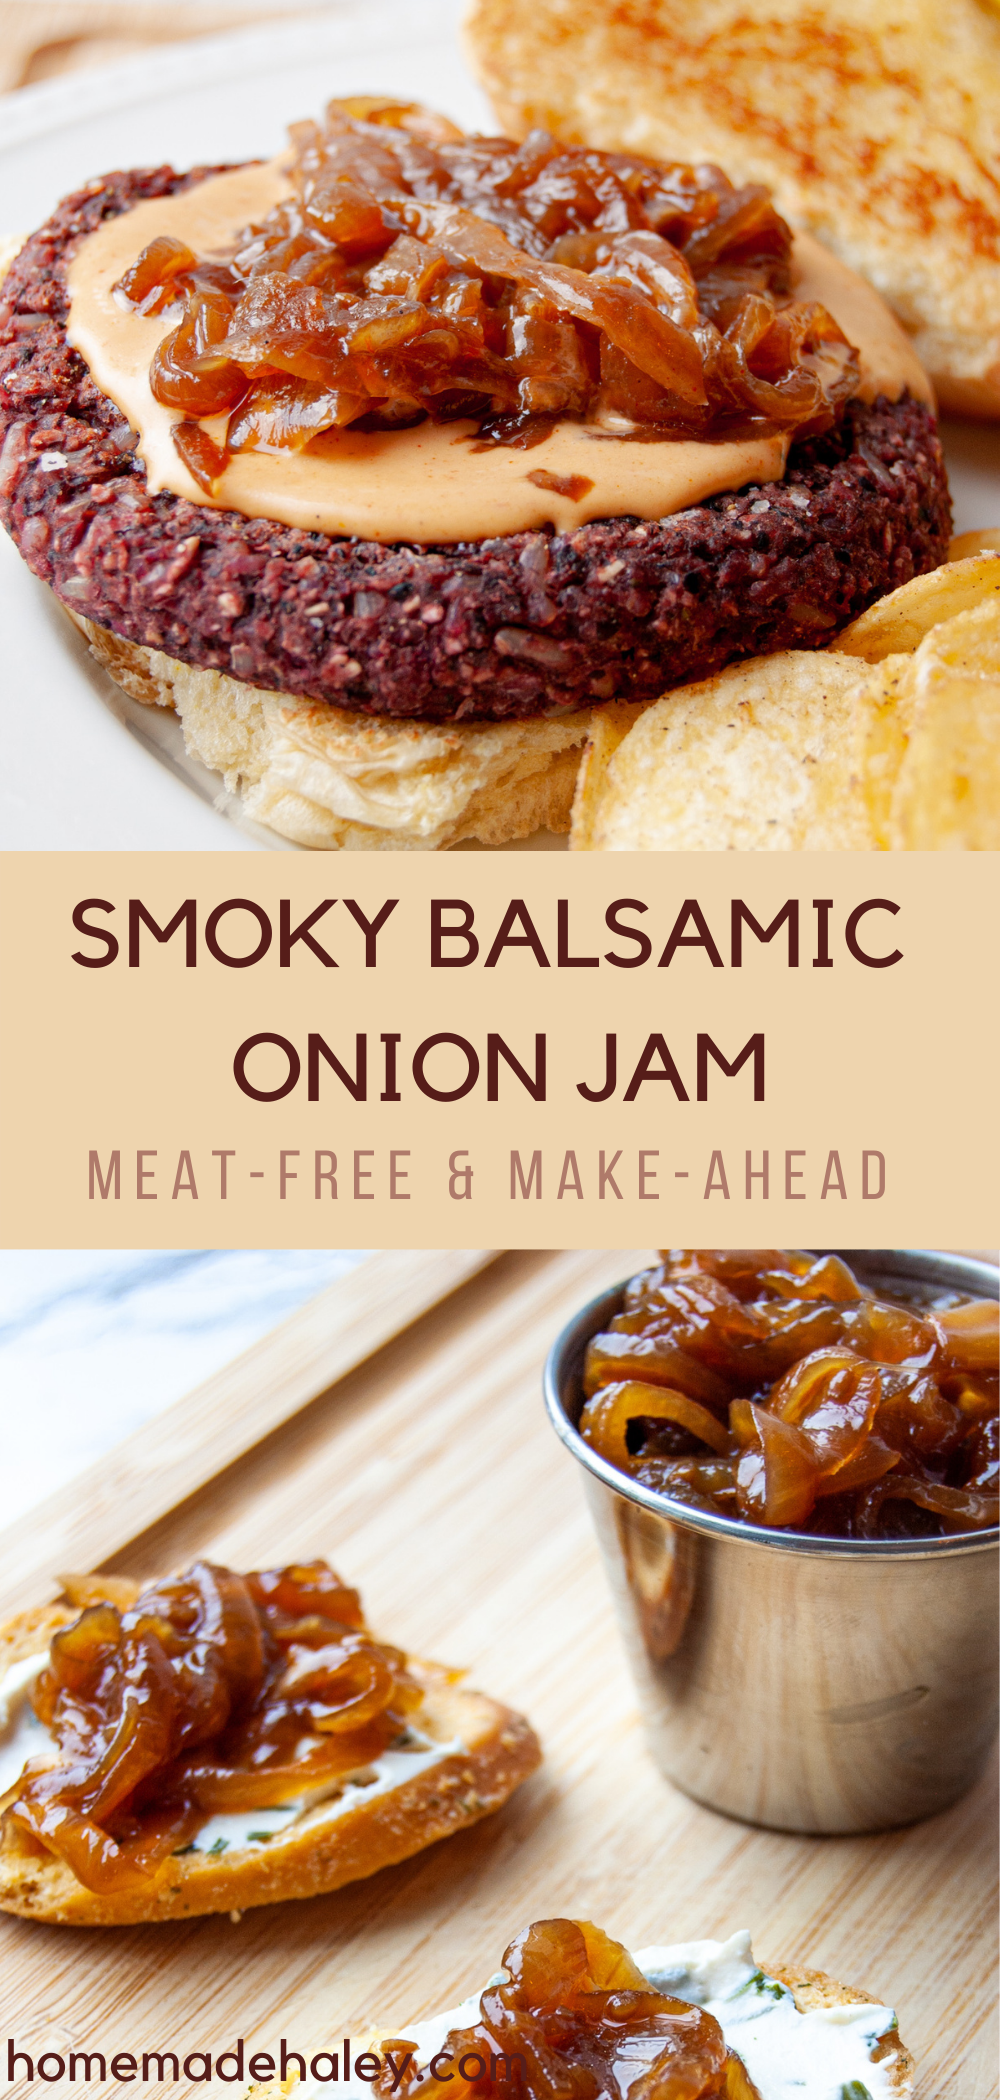 This Smoky Balsamic Onion Jam is easy to whip up and brings so much flavor to any dish or appetizer! Try it on burgers, crackers, or even sandwiches. It's great to keep in the fridge to bring a sweet and smoky flavor to any meal. 